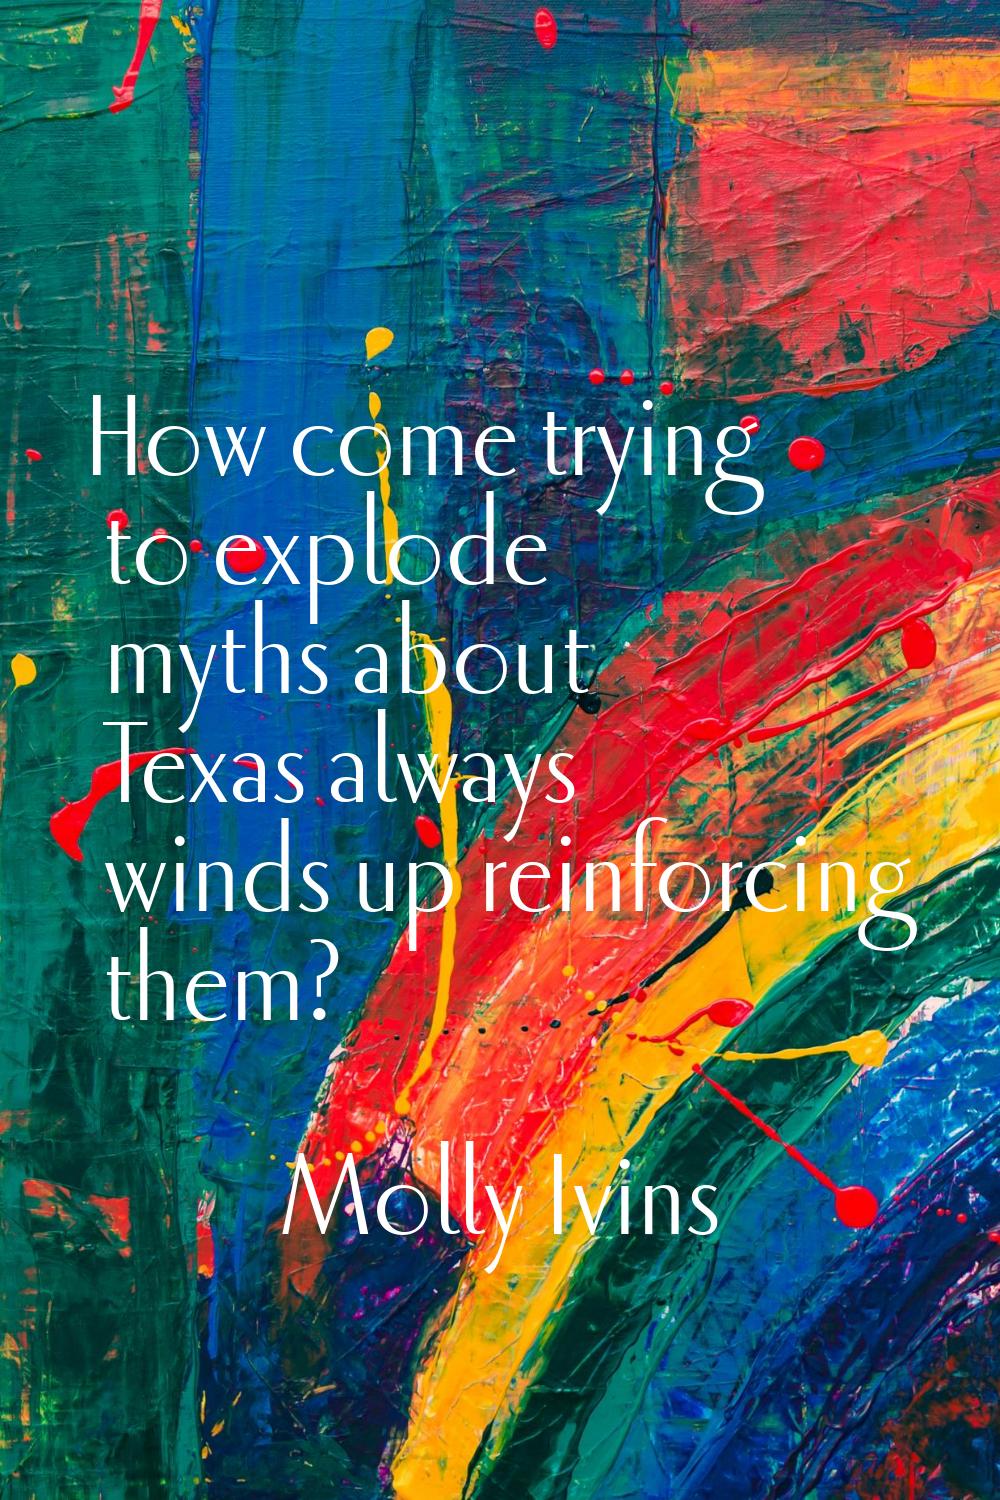 How come trying to explode myths about Texas always winds up reinforcing them?